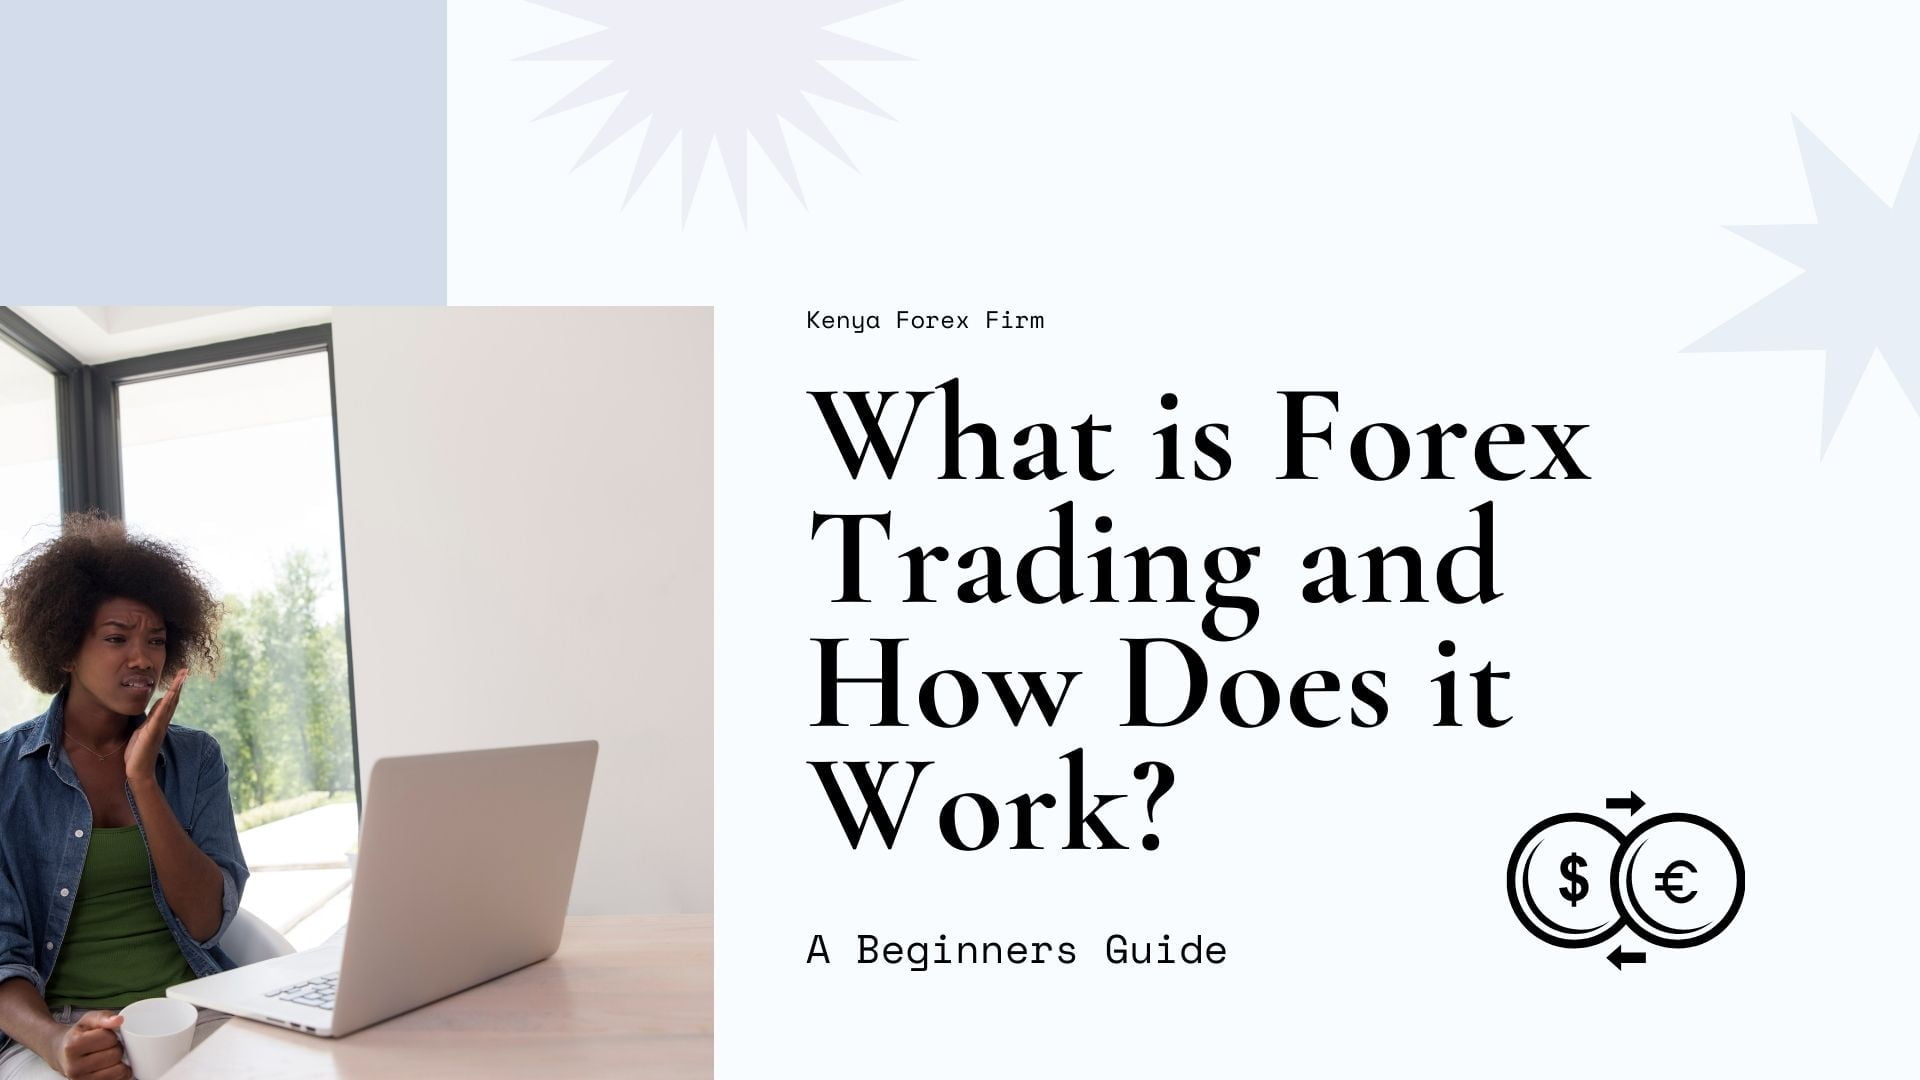 What is Forex Trading and How Does it Work?